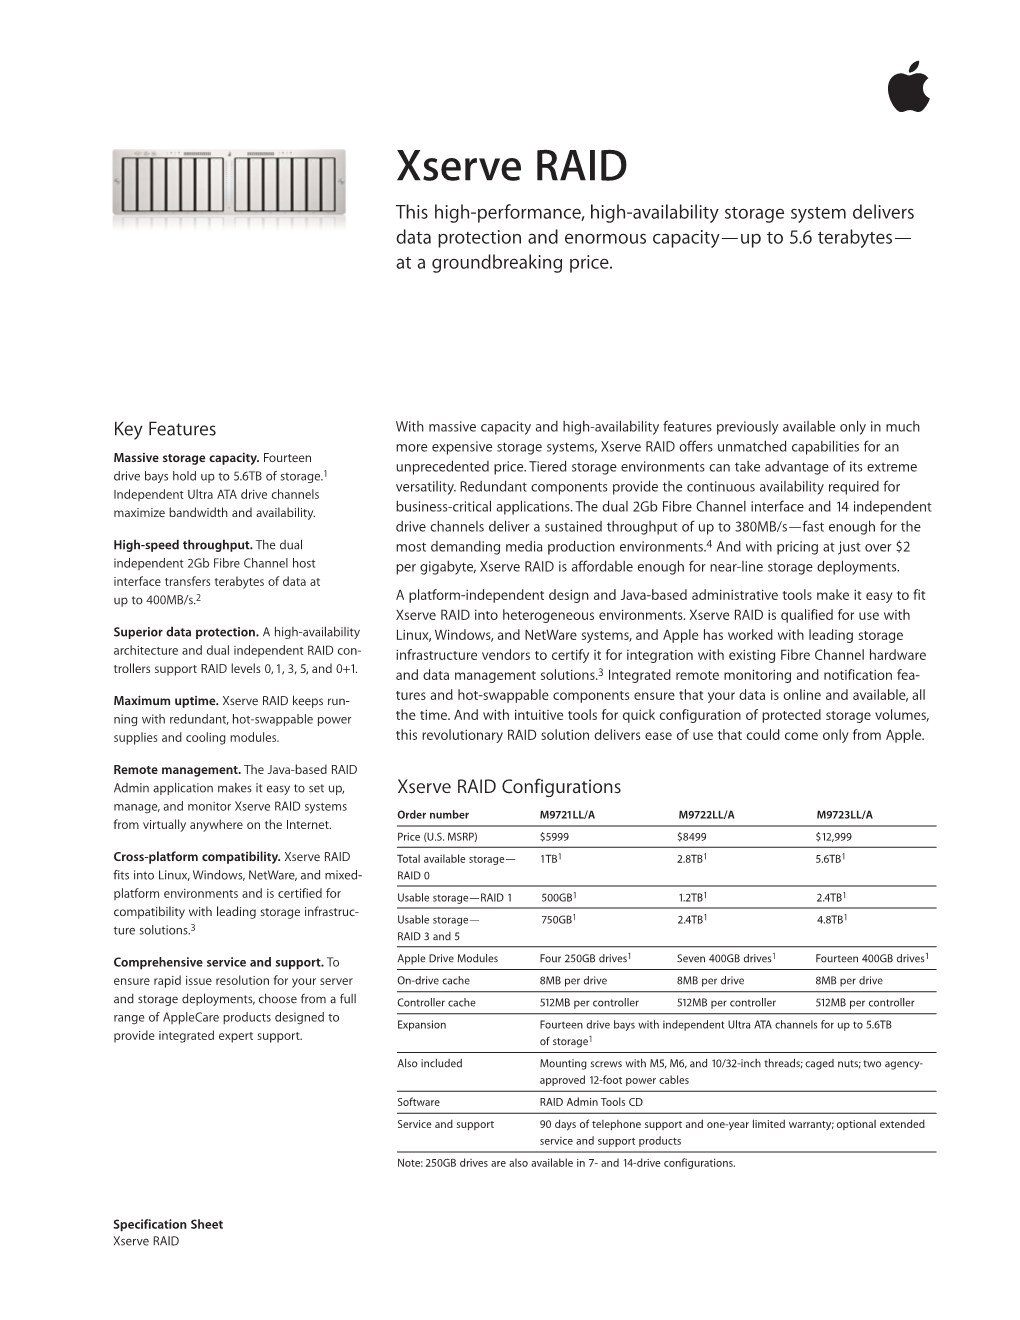 Xserve RAID This High-Performance, High-Availability Storage System Delivers Data Protection and Enormous Capacity—Up to 5.6 Terabytes— at a Groundbreaking Price